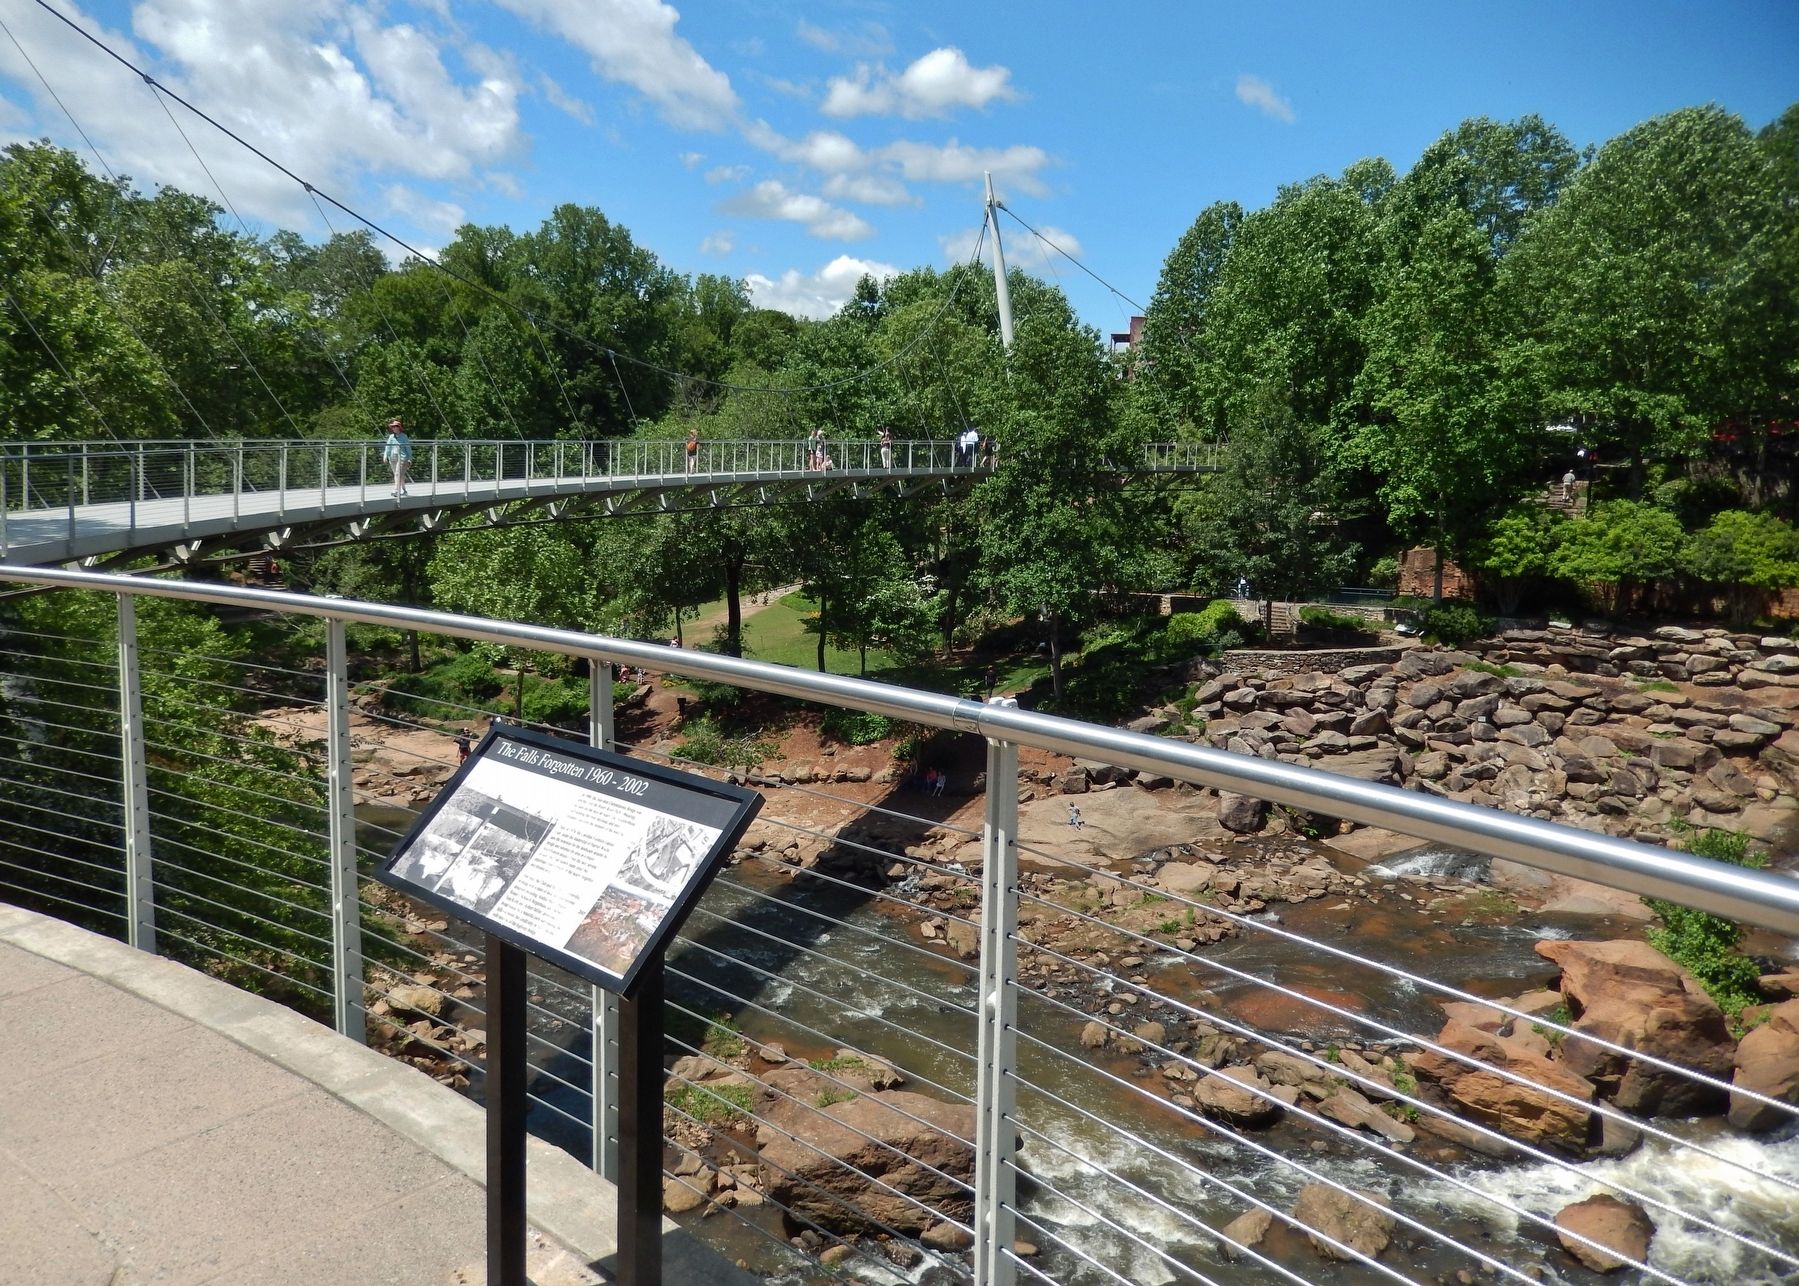 The Falls Forgotten 1960-2002 Marker wide<br>(<i>Liberty Bridge over Reedy River in background</i>) image. Click for full size.